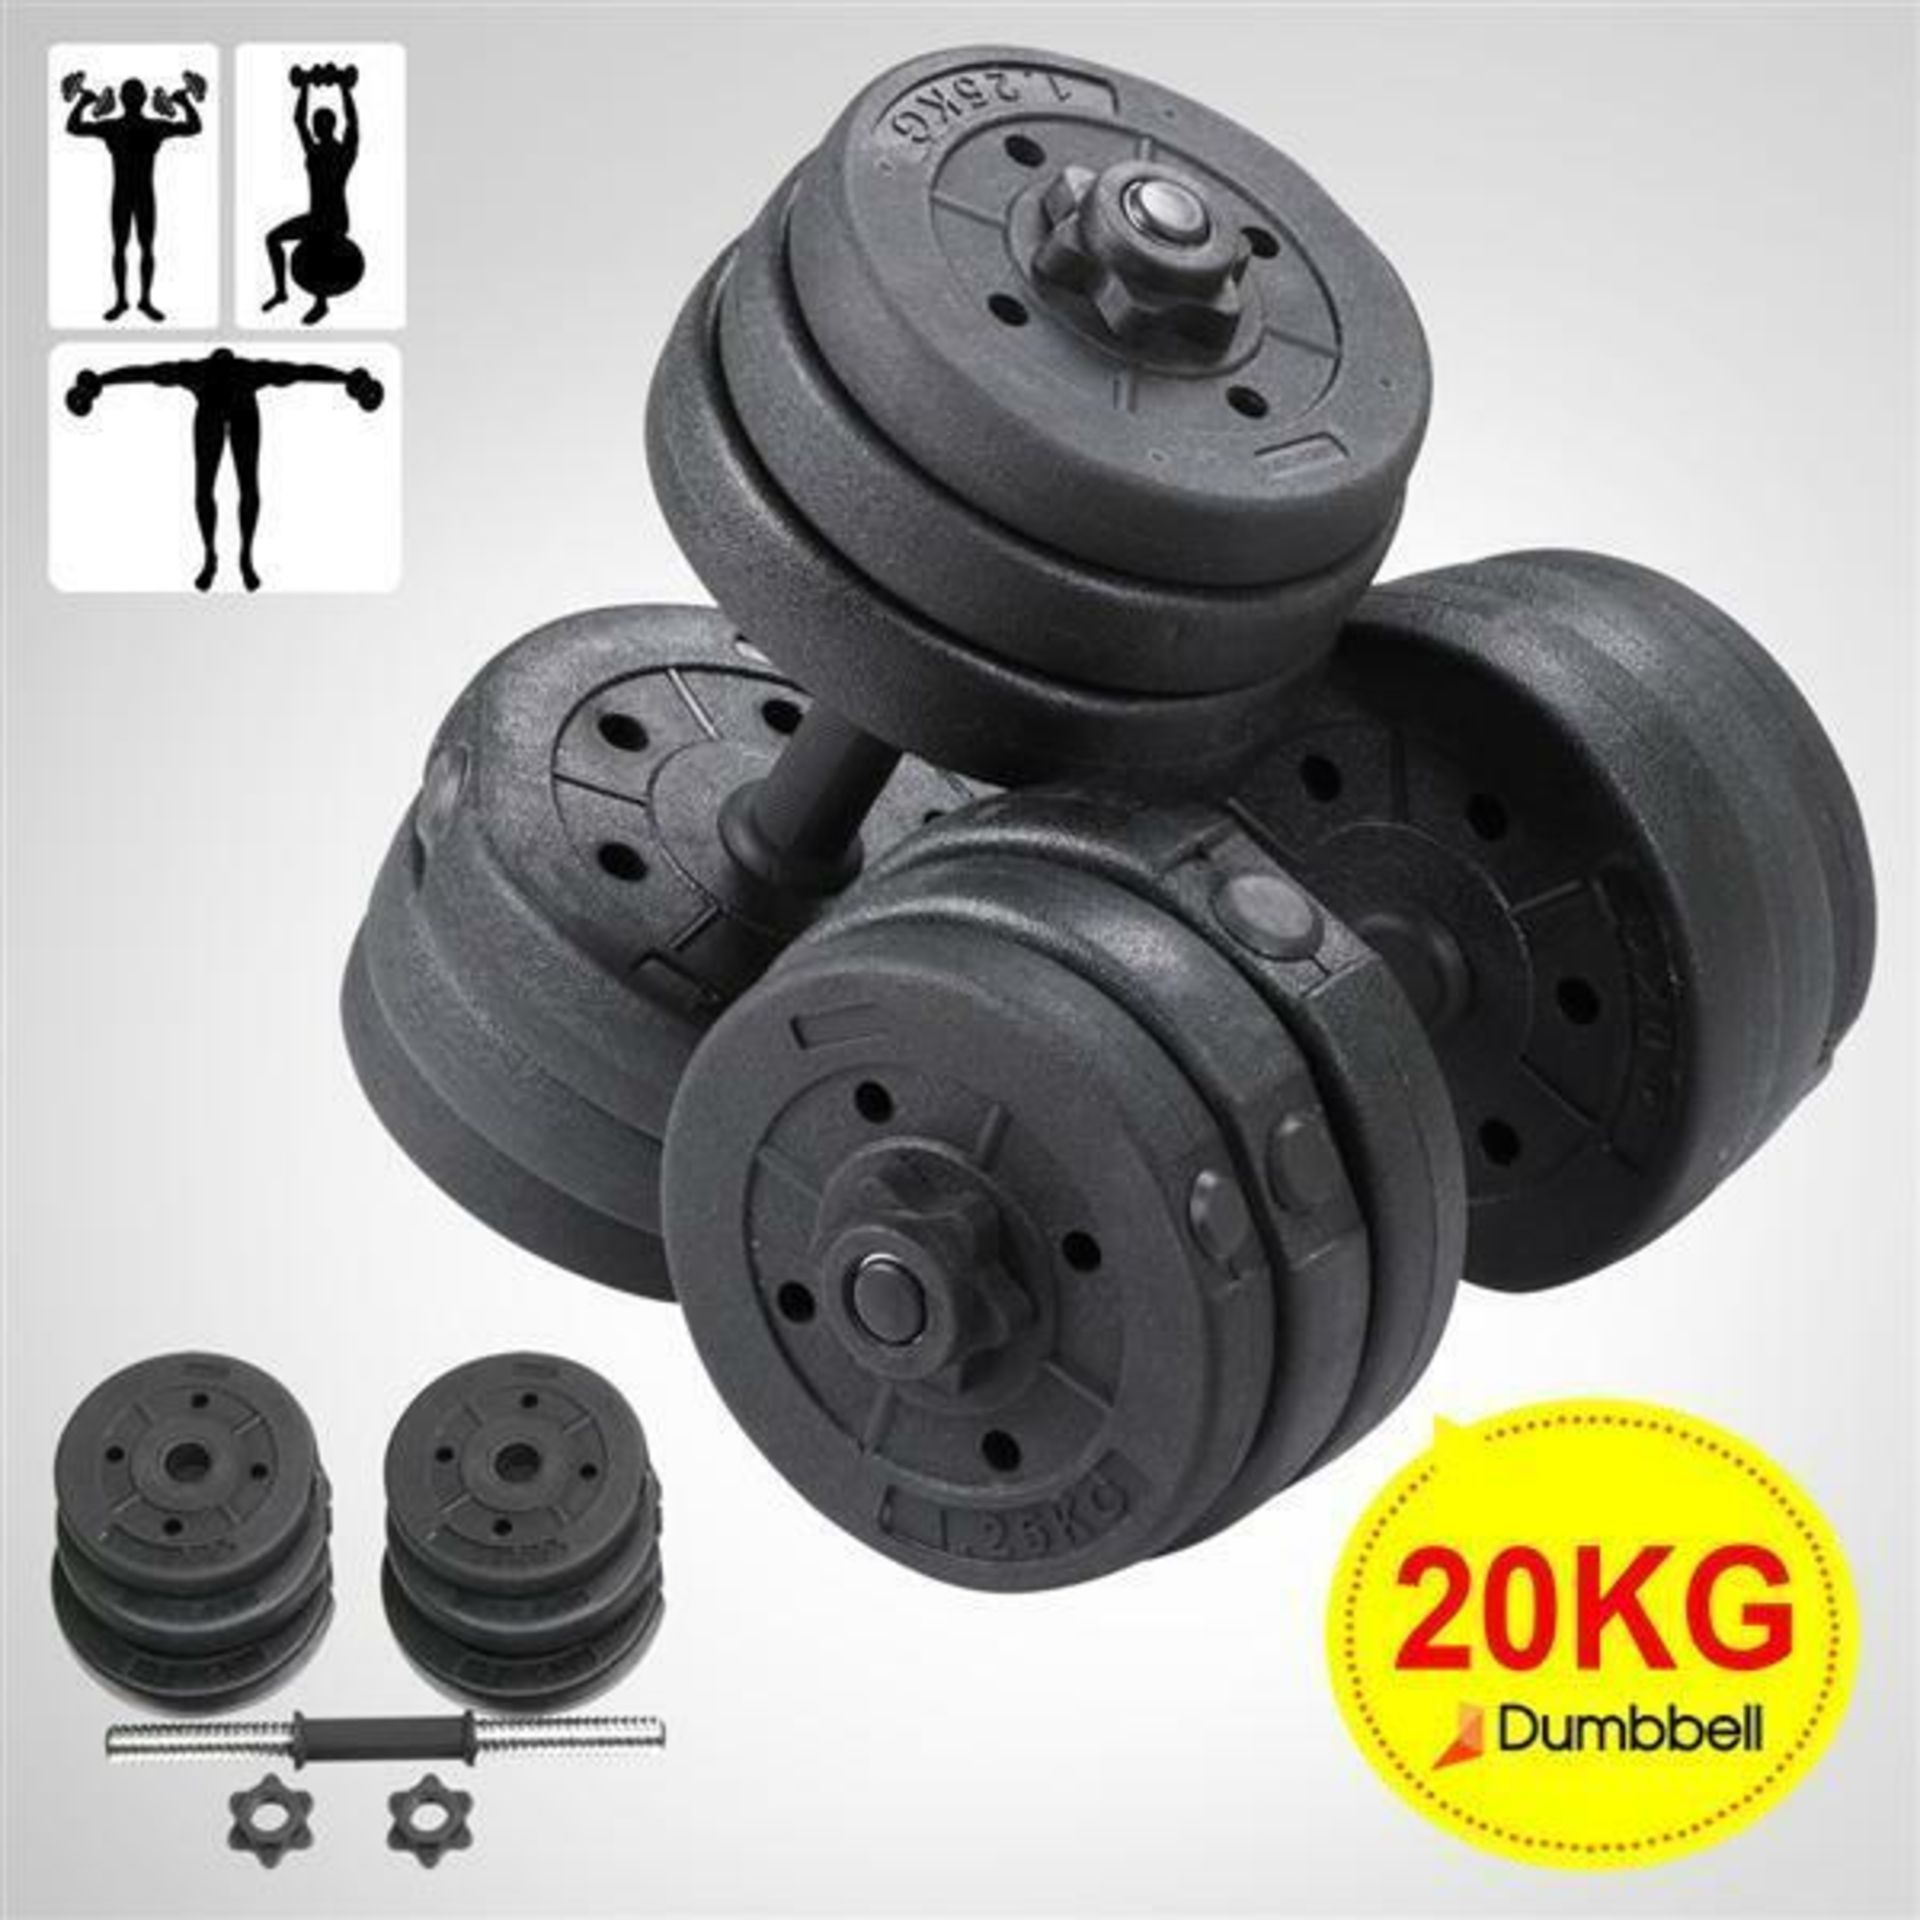 PALLET TO CONTAIN 36 x SETS OF 2 - 20KG ADJUSTABLE WEIGHT DUMBBELL SETS. (PALLET ID: 8) EACH SET